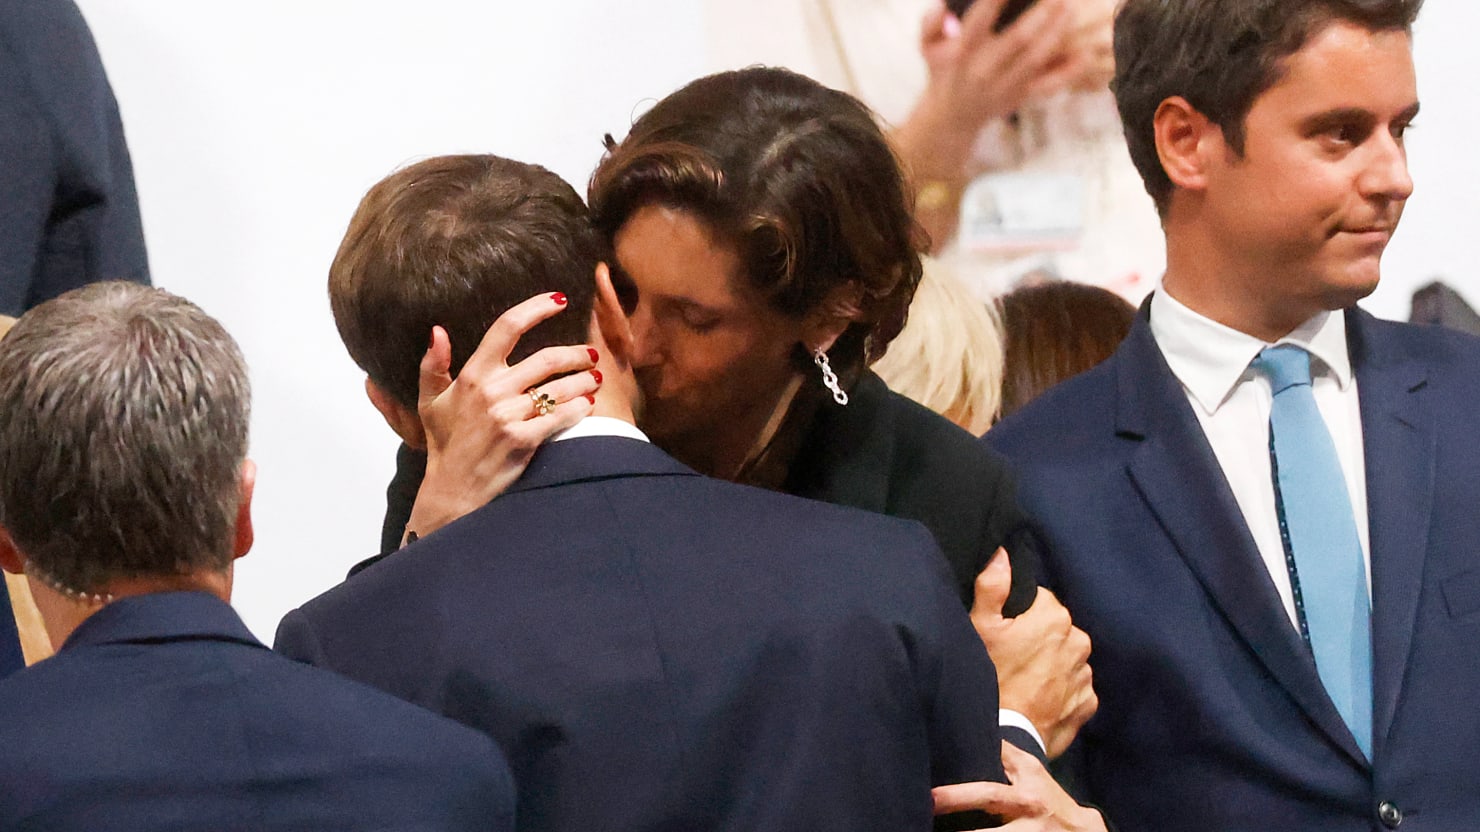 Macron’s Kiss with French Sports Minister During Olympics Causes a Stir